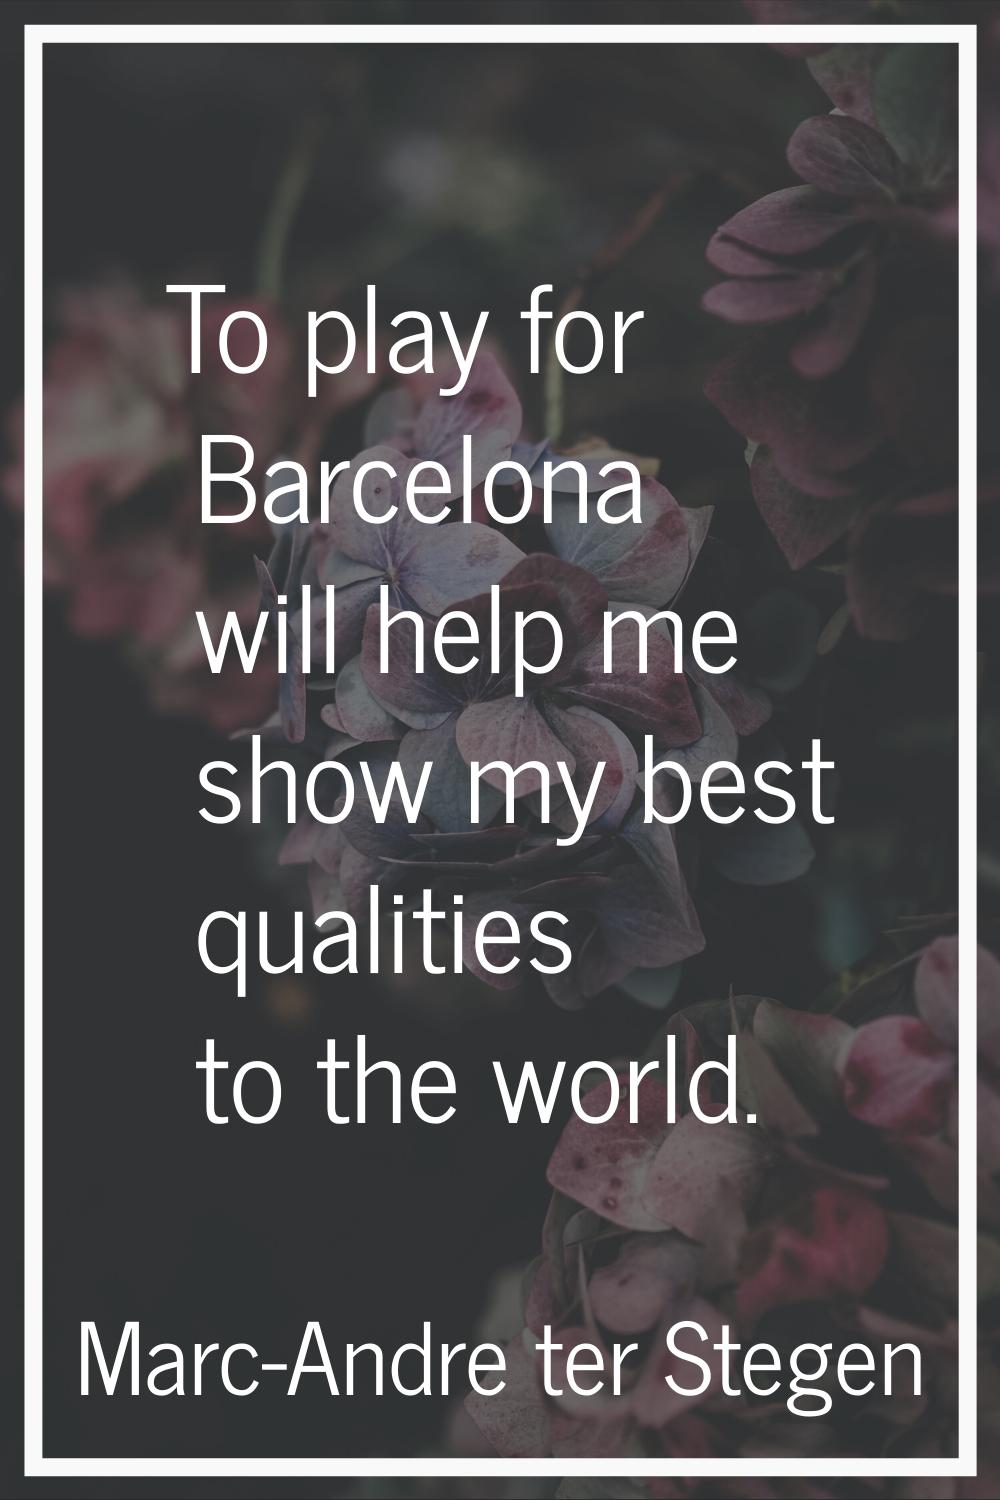 To play for Barcelona will help me show my best qualities to the world.